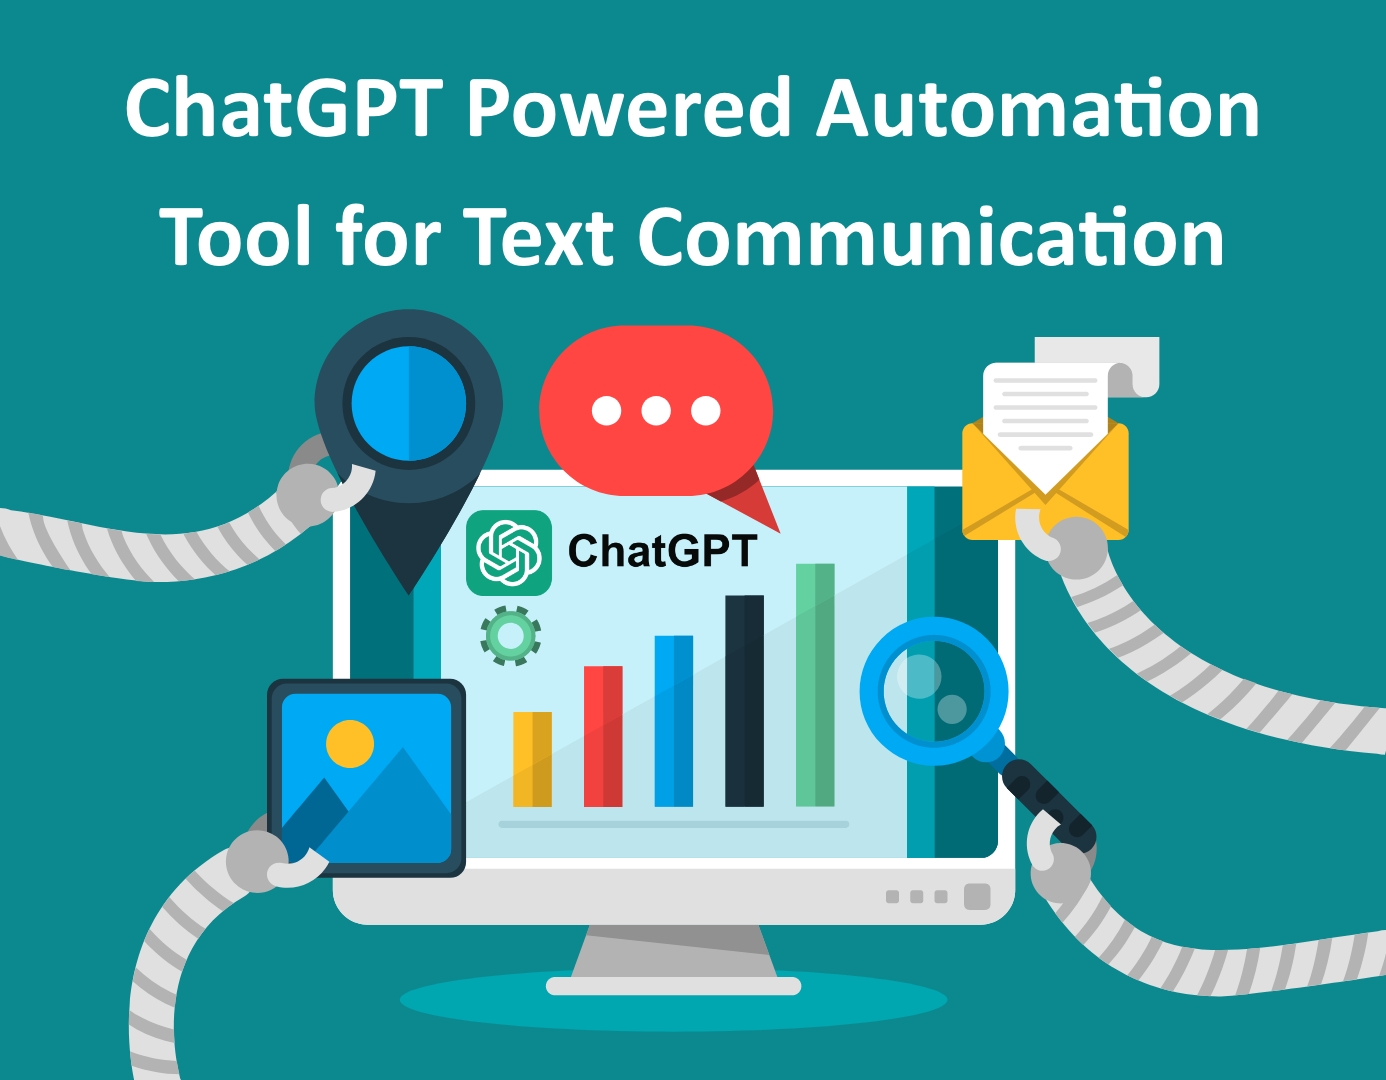 ChatGPT-powered automation tool revolutionizing text communication, enhancing efficiency and productivity in various applications